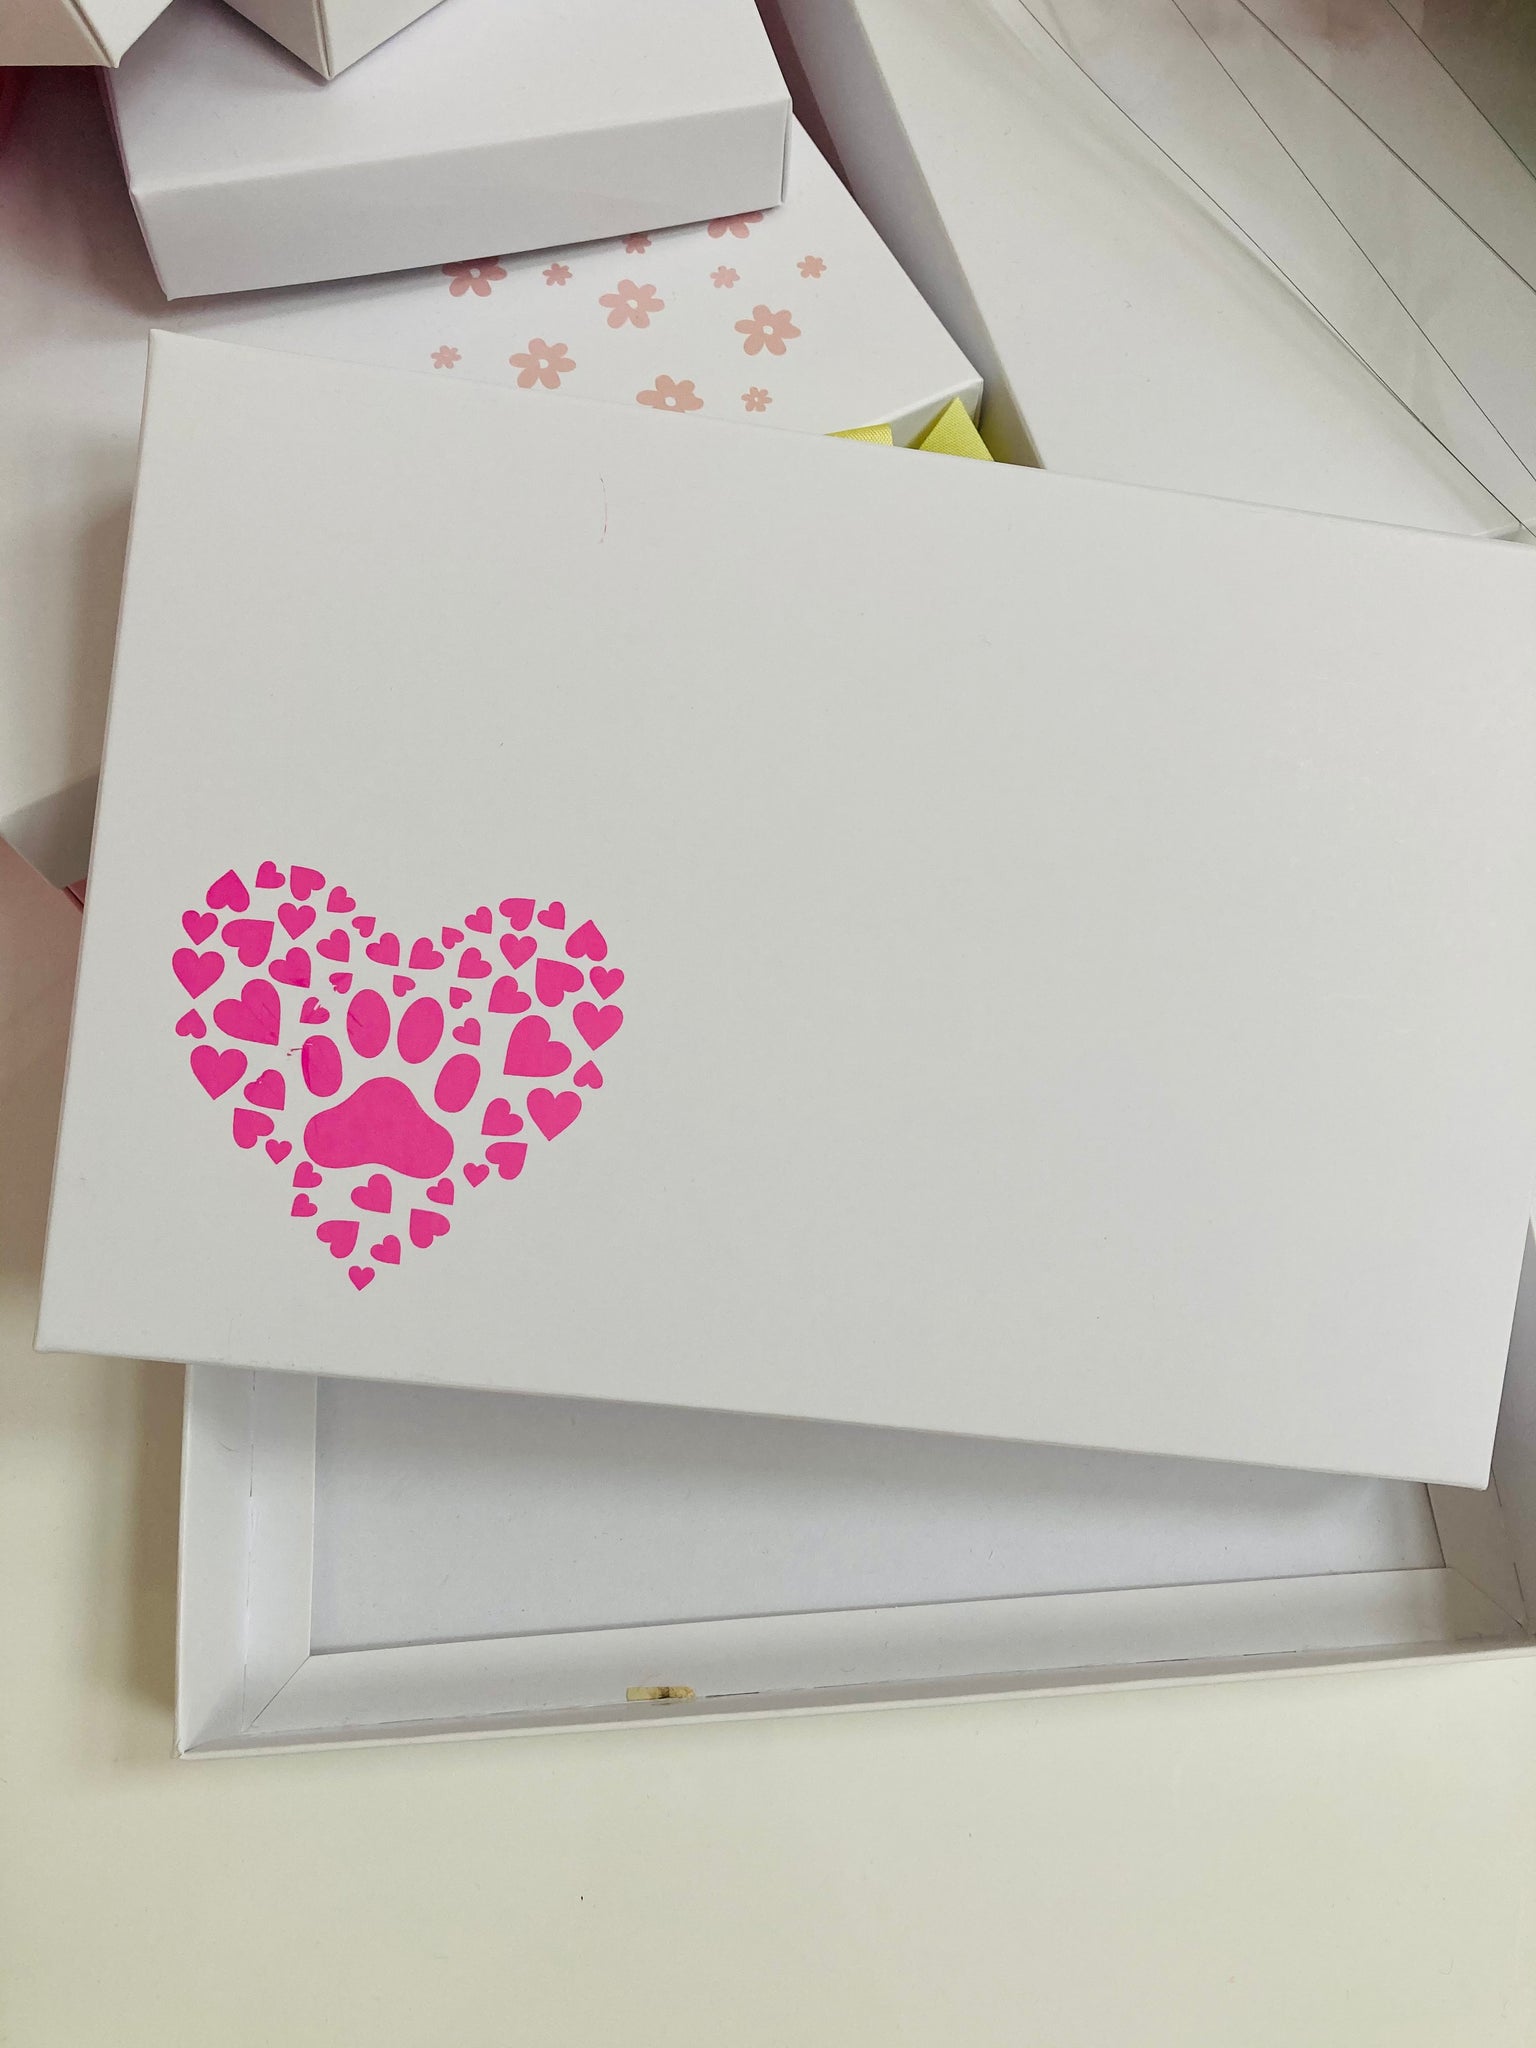 PINK PAW PRINT HEART SOLID WHITE LID GIFT BOX BLANK 240x155x30mm